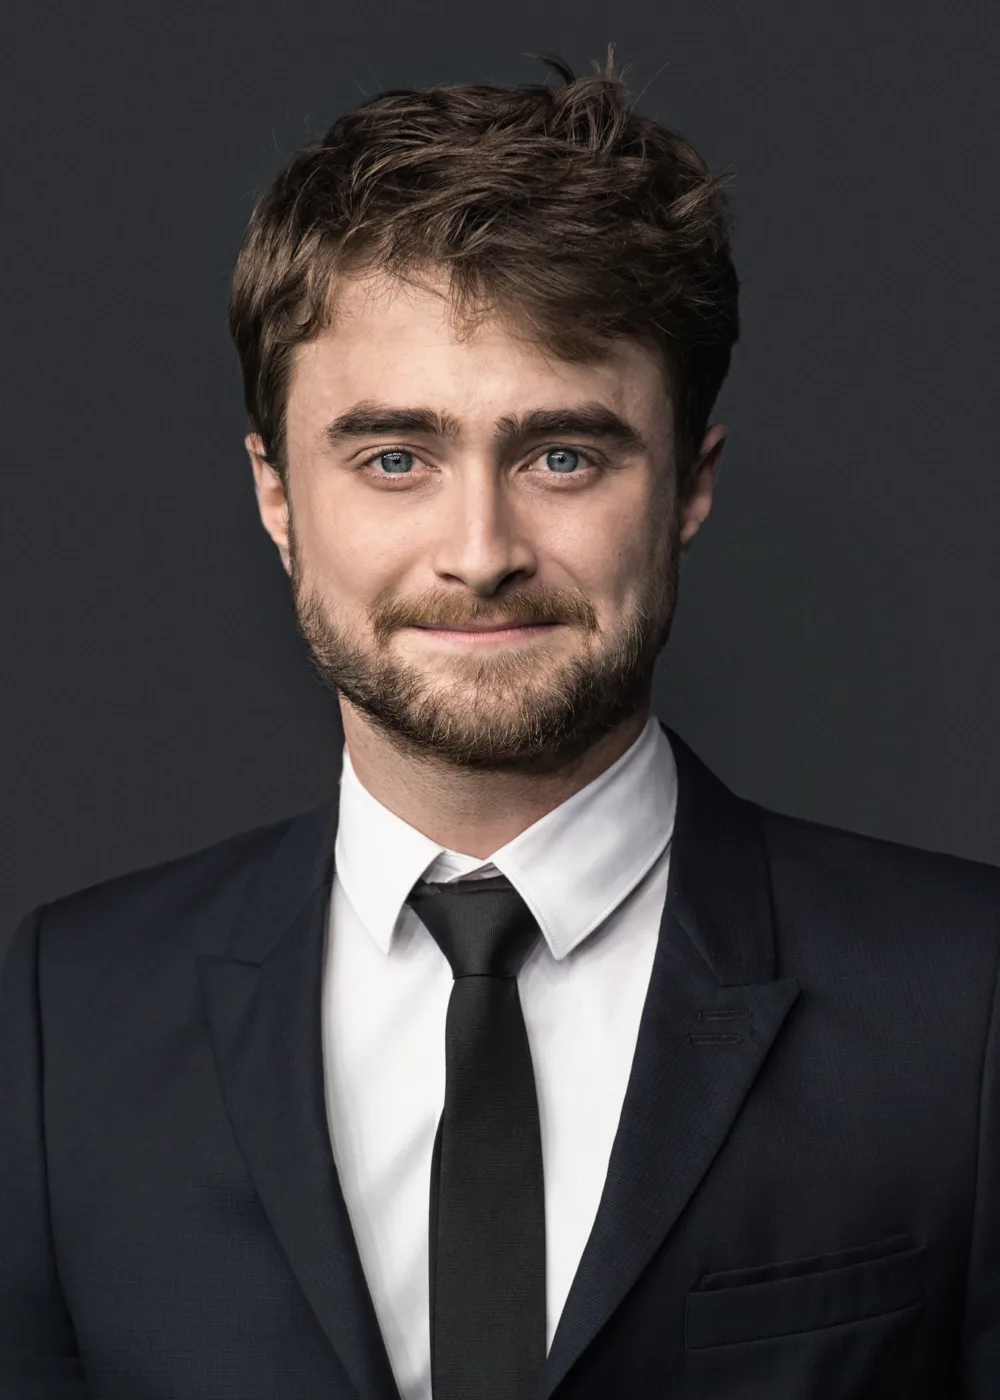 Daniel Radcliffe is an English actor best known for his role as Harry Potter in the film adaptations of J.K. Rowling's beloved book series. Born on July 23, 1989, in London, Radcliffe began acting at a young age and was just eleven years old when he landed the lead role in Harry Potter and the Philosopher's Stone, the first film in the series. Over the course of the next decade, Radcliffe starred in all eight Harry Potter films, becoming one of the most recognizable and beloved actors of his generation. Since the conclusion of the Harry Potter franchise, Radcliffe has continued to act in a variety of film and television projects, including the critically acclaimed Swiss Army Man and the TBS series Miracle Workers. In addition to his acting work, Radcliffe is known for his philanthropy and advocacy work, supporting a variety of causes including LGBT rights, mental health, and literacy. He has also been recognized for his work on stage, earning critical acclaim for his performances in plays like Equus and The Cripple of Inishmaan. With his talent, charm, and dedication to making a difference in the world, Radcliffe has become a beloved figure in the entertainment industry and a role model for young people around the world.